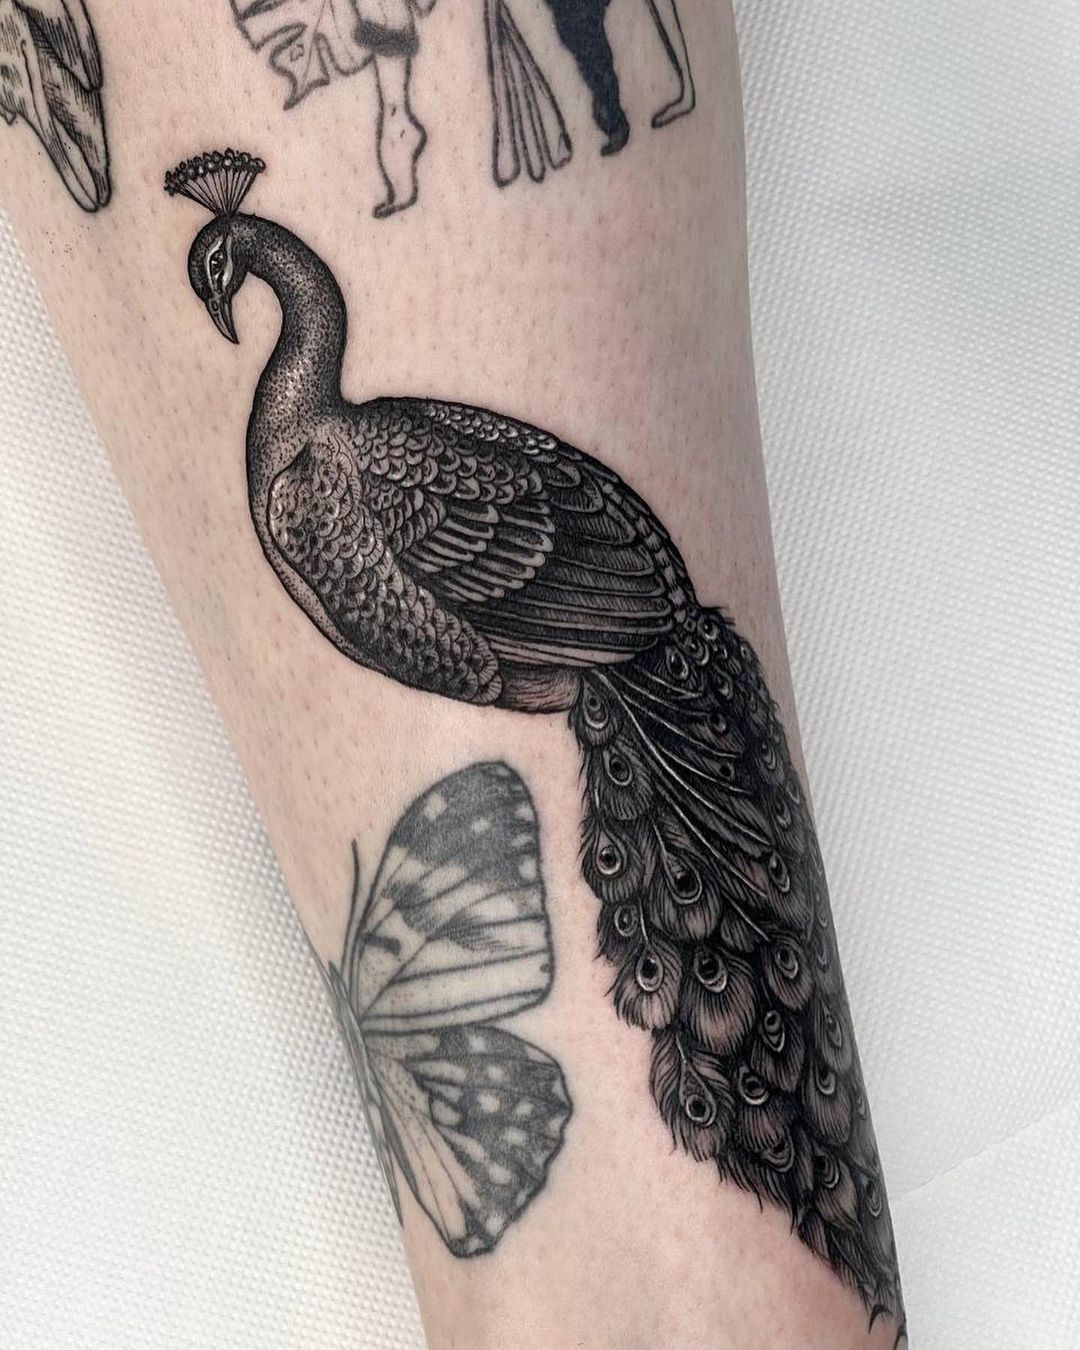 Black and gray peacock tattoo by atelier.scarabee